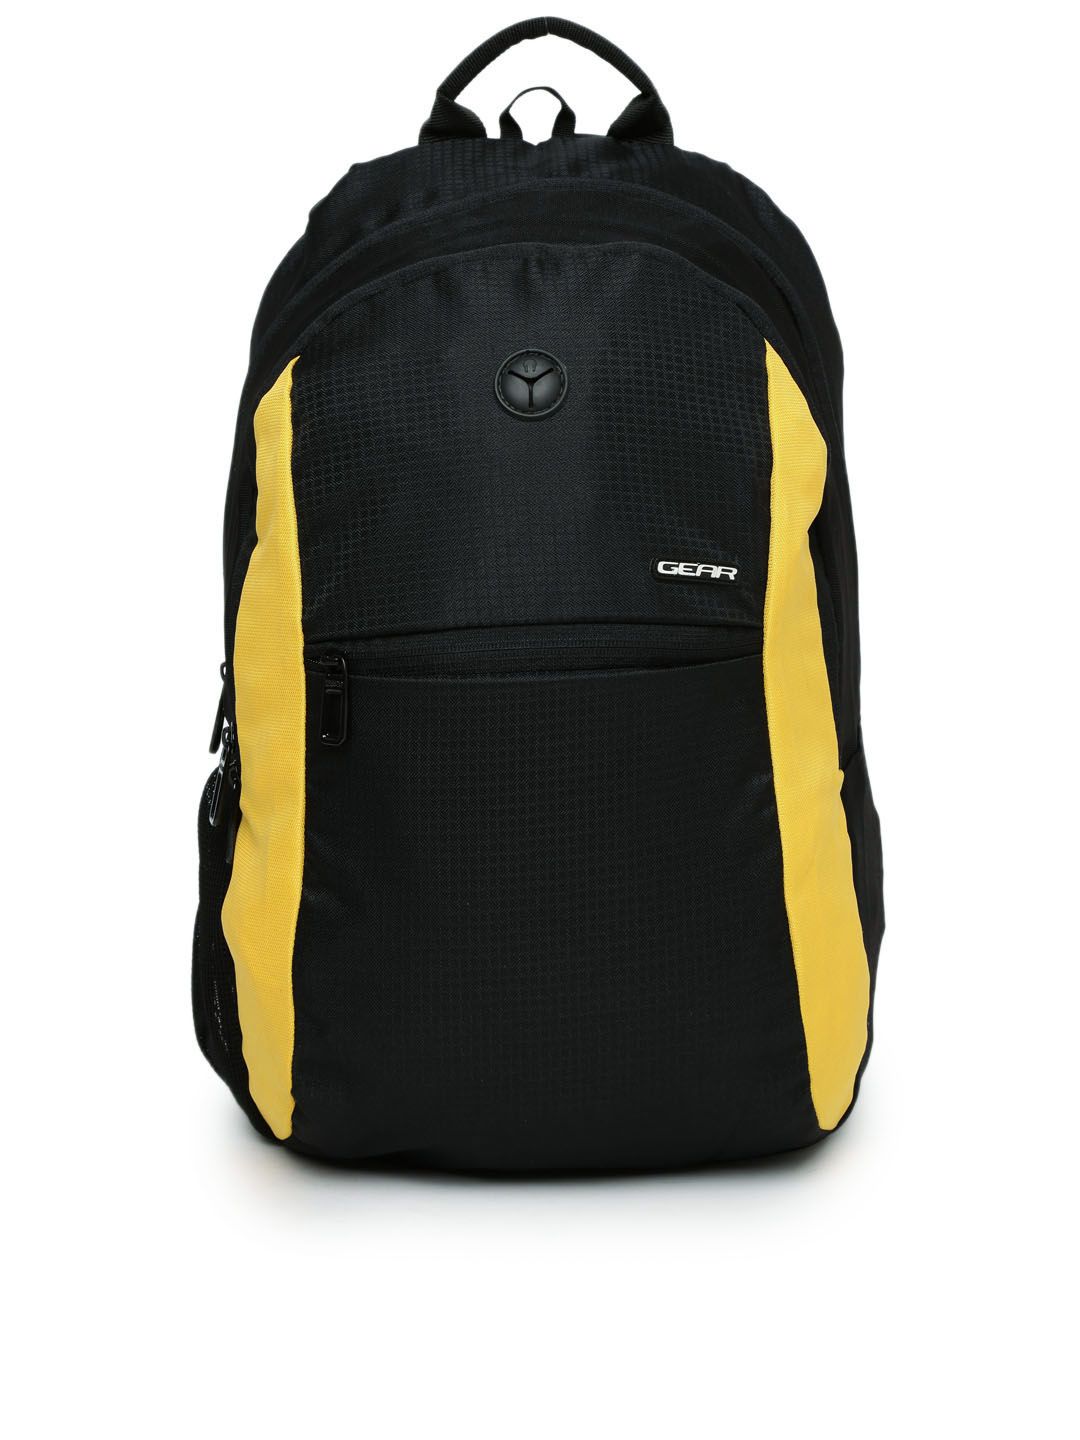 Gear Unisex Black & Yellow Colourblocked Eco 1 Backpack Price in India